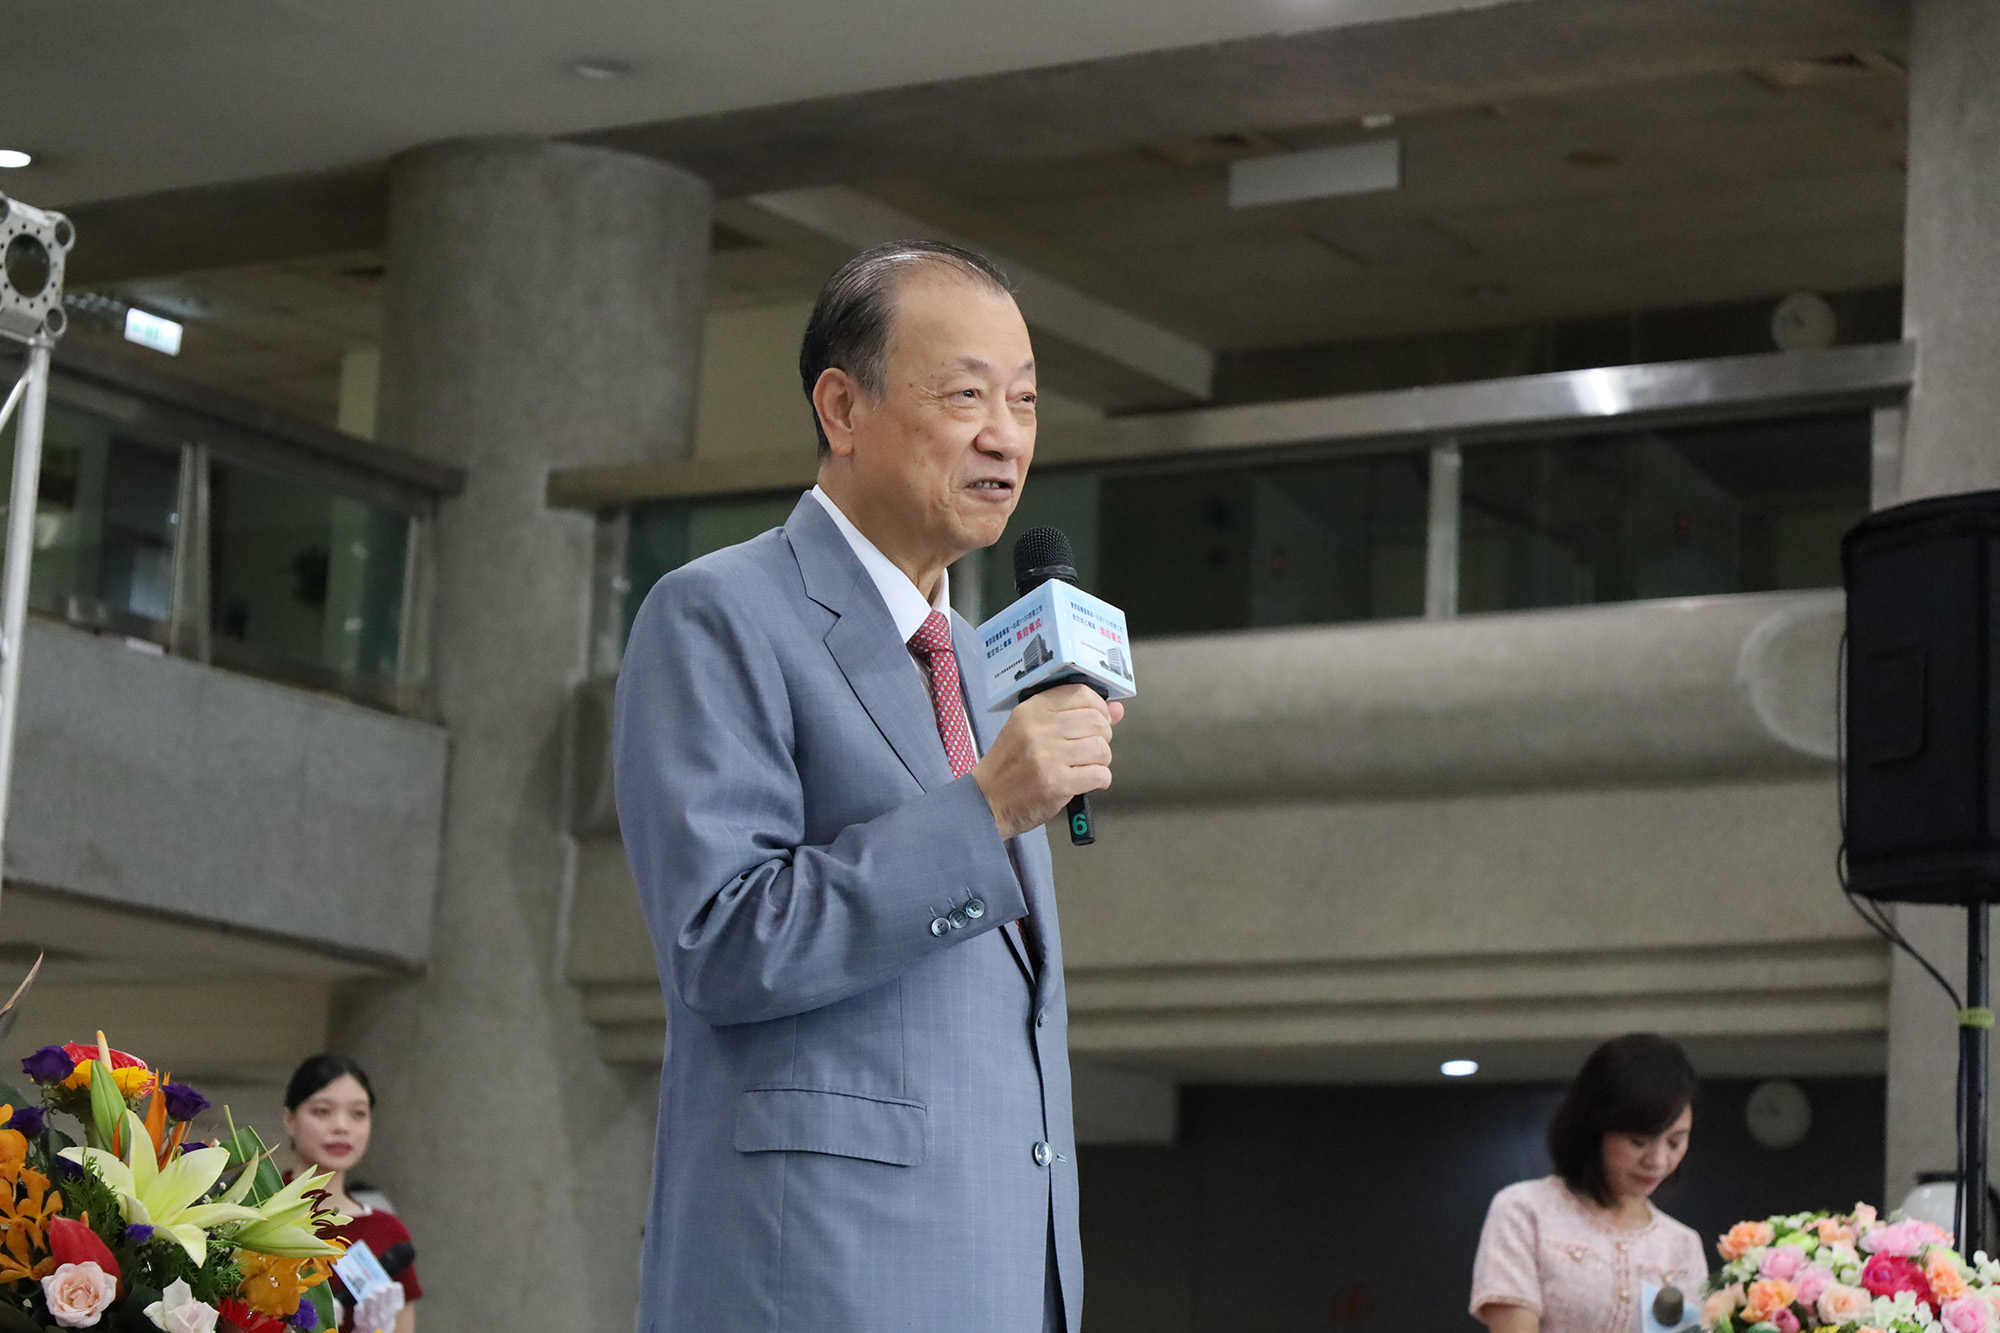 Chairman Chang-Hai Tsai of Asia University mentioned that they will integrate education, medical services, and the health industry into the "Fengfu Park", stimulating that this initiative could generate around 2,000 job opportunities and contribute to the development of Fengyuan.